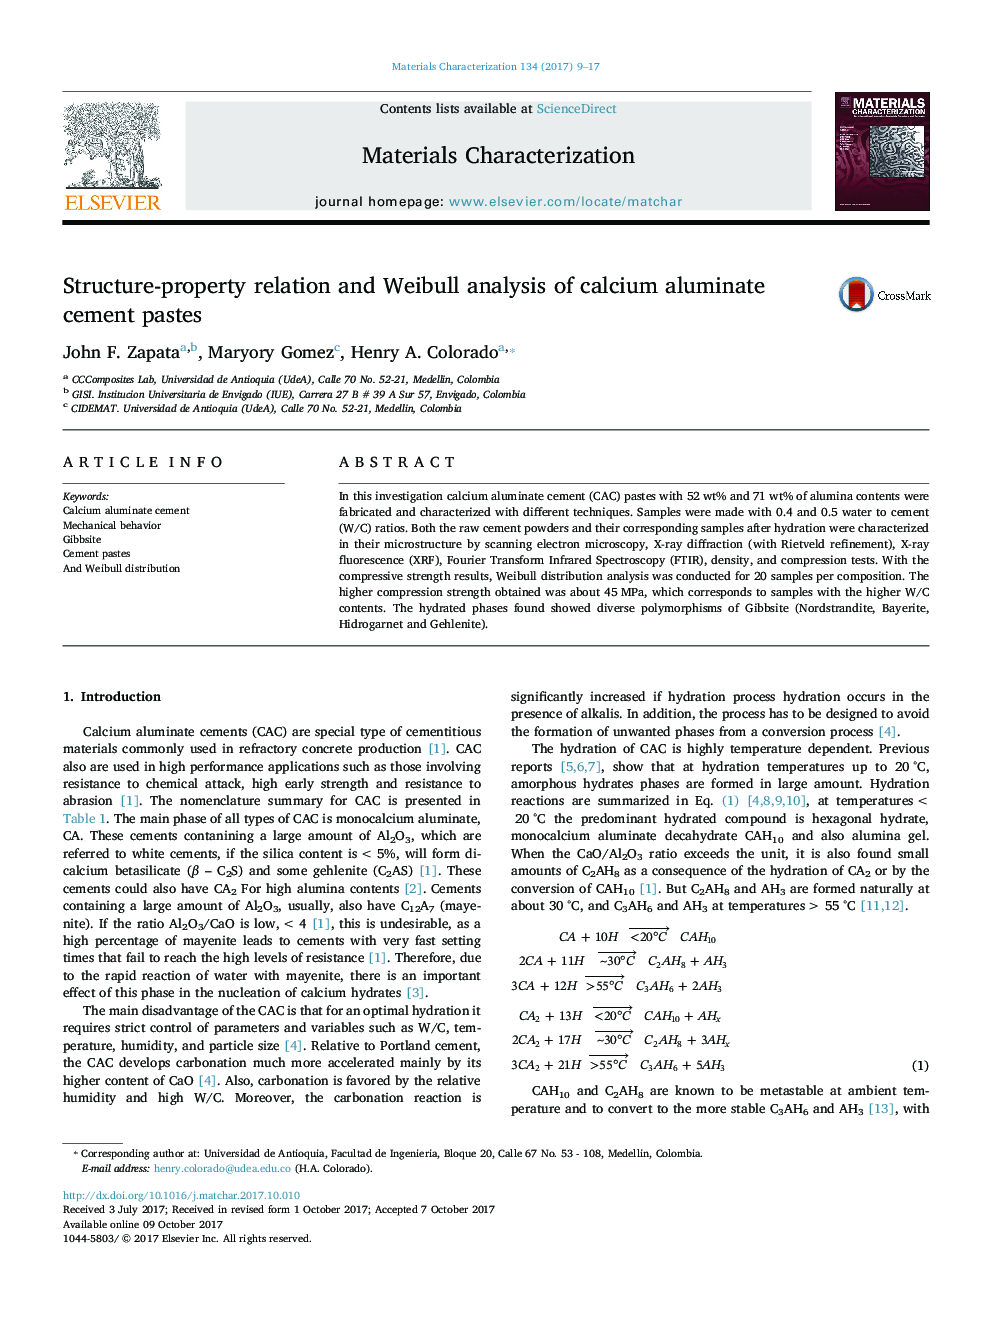 Structure-property relation and Weibull analysis of calcium aluminate cement pastes